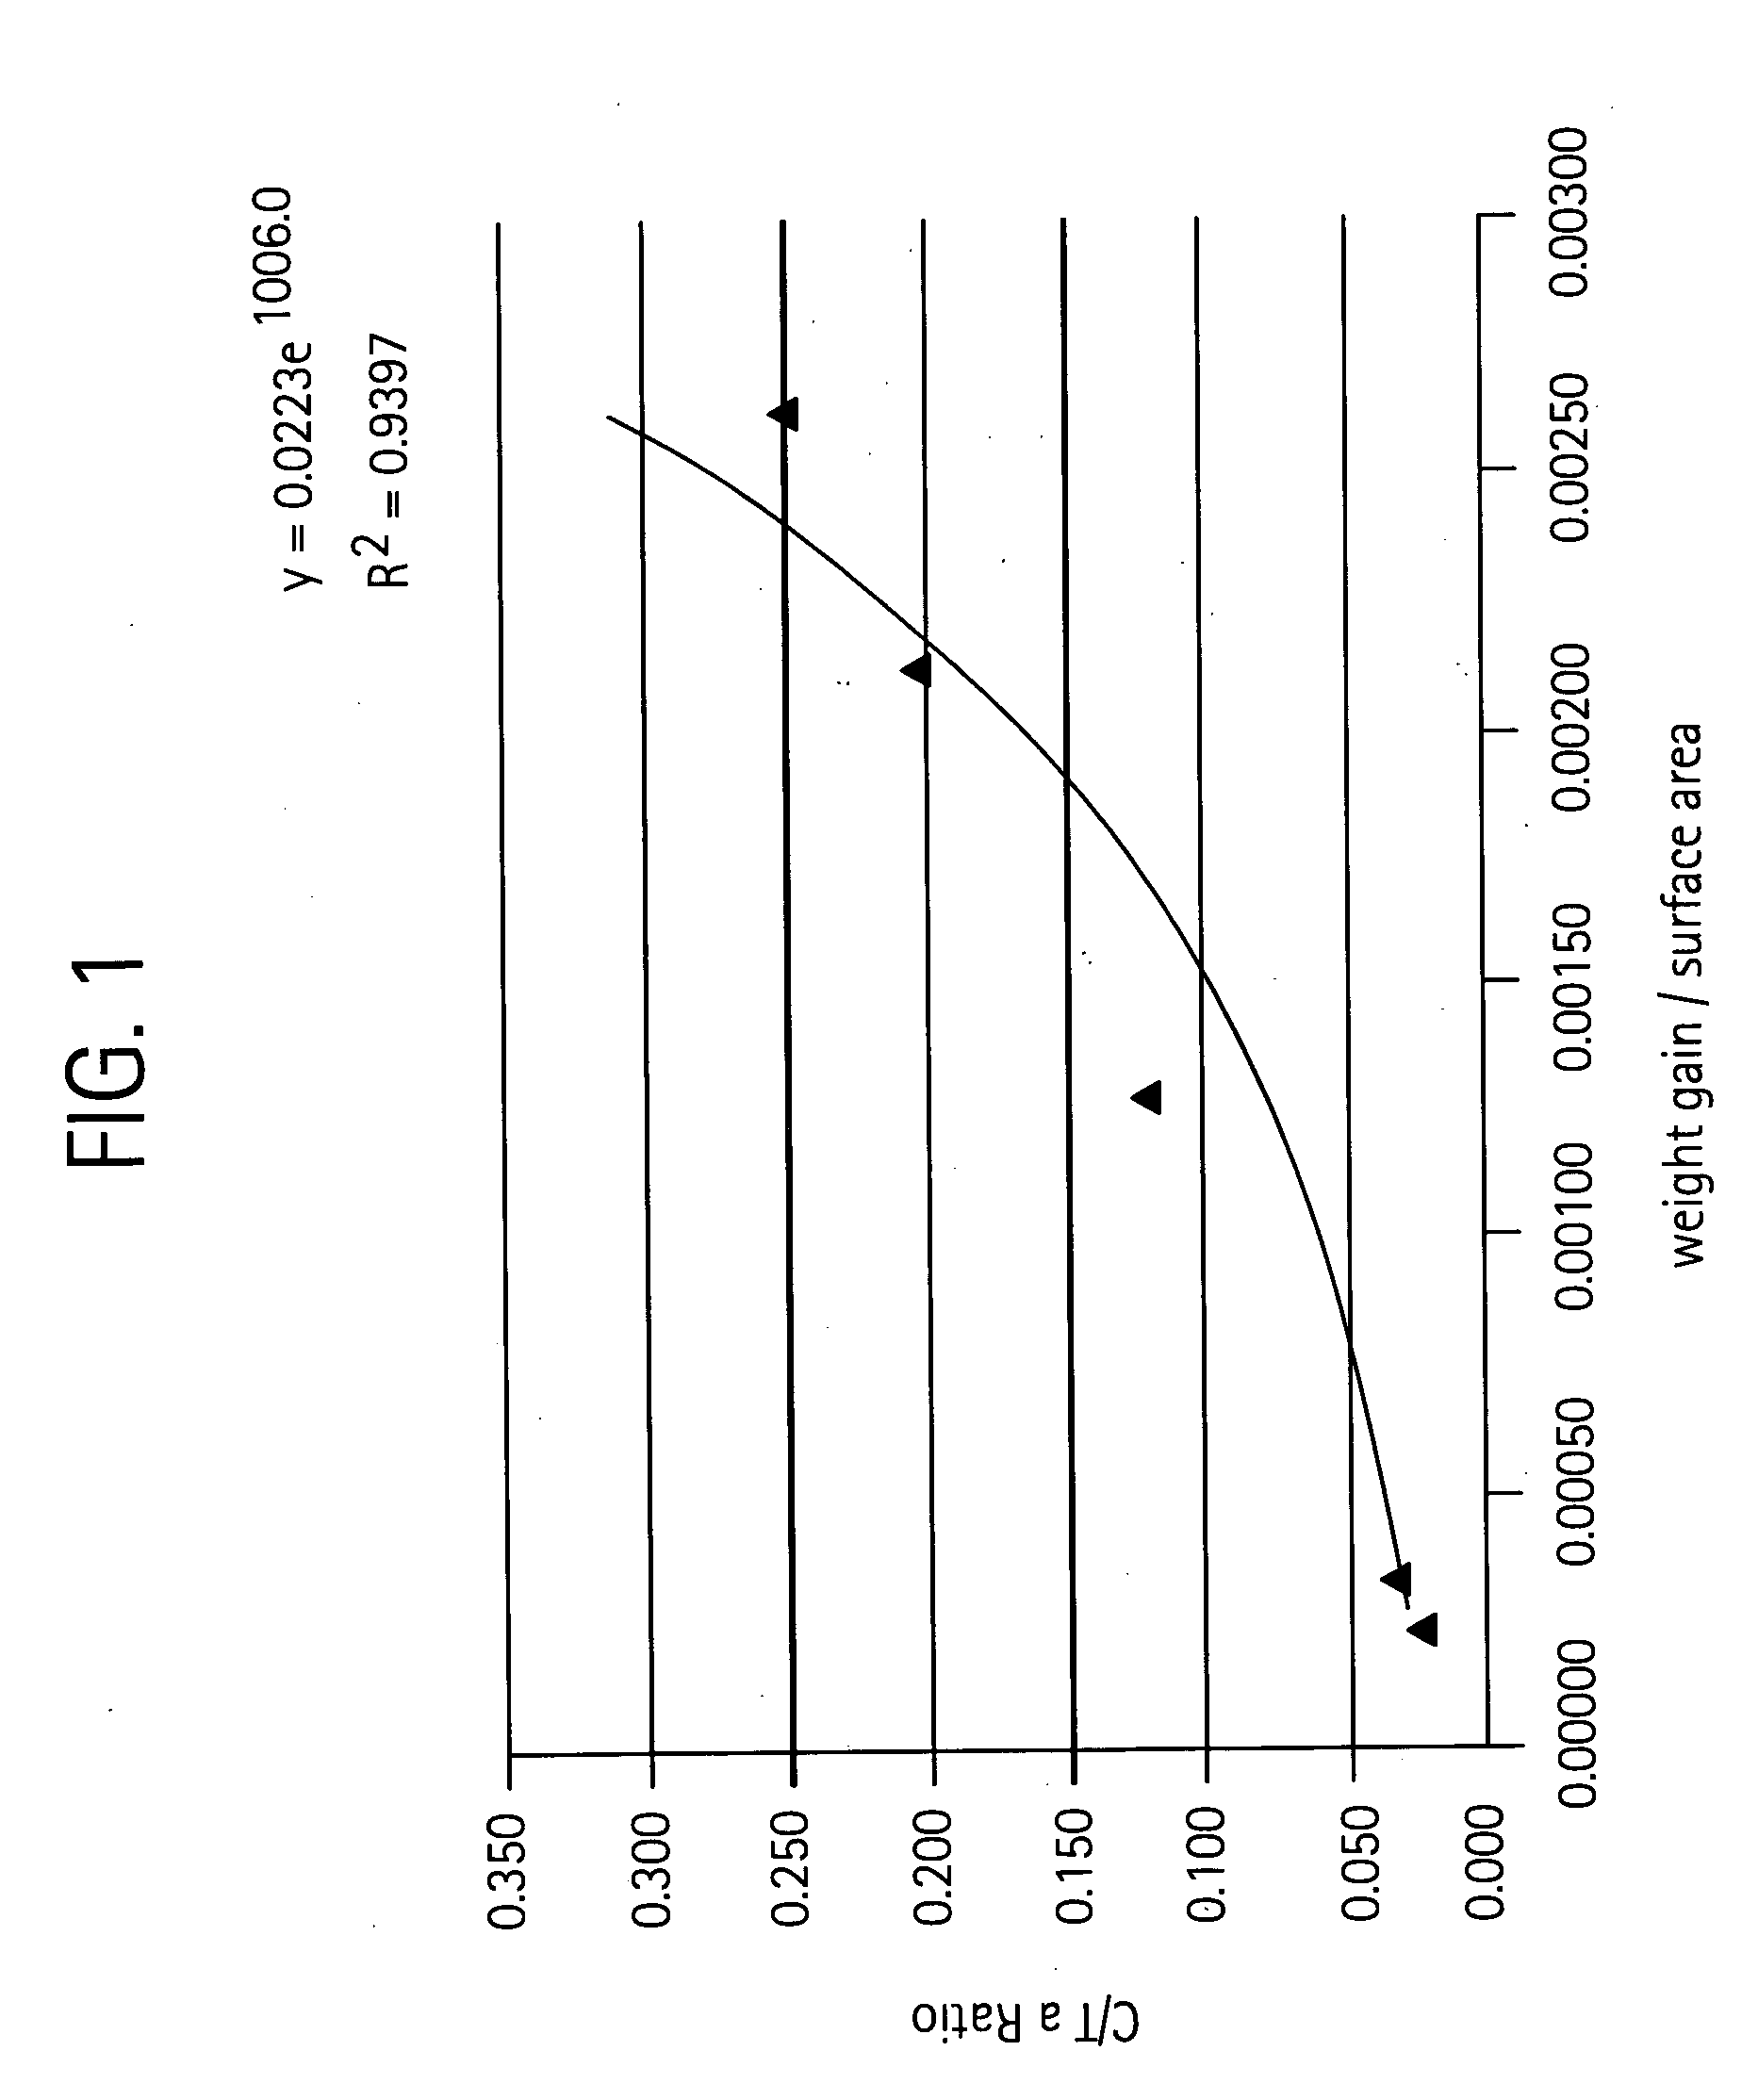 Composite refractory metal carbide coating on a substrate and method for making thereof